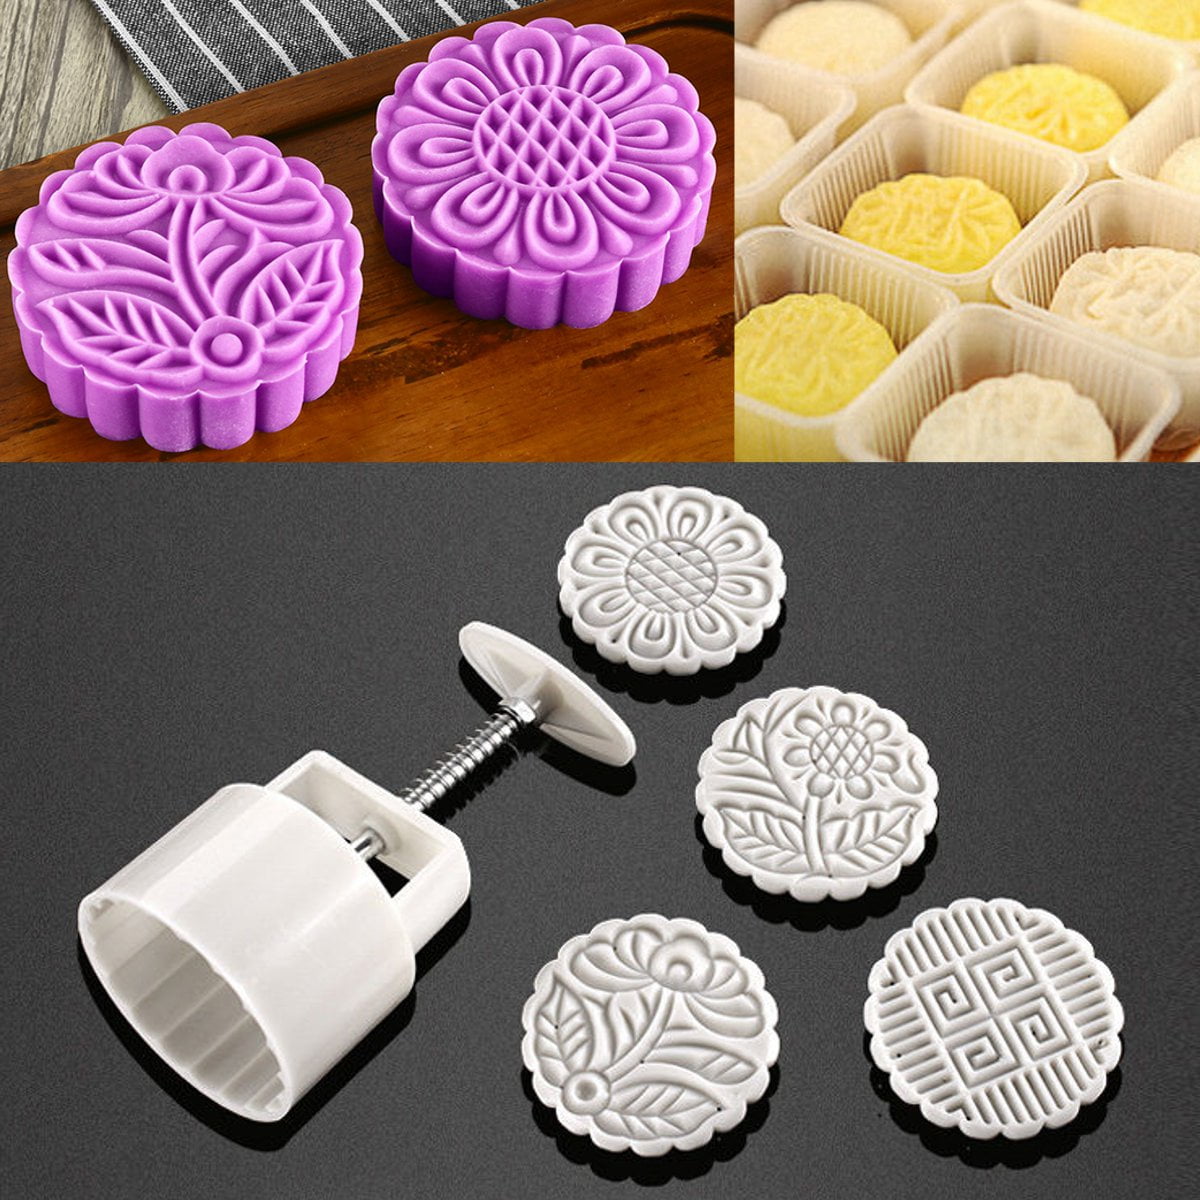 New Version Concave Round Moon Cake Mold 150g/185g 1 MOLD 6 Stamps DIY TOOL 